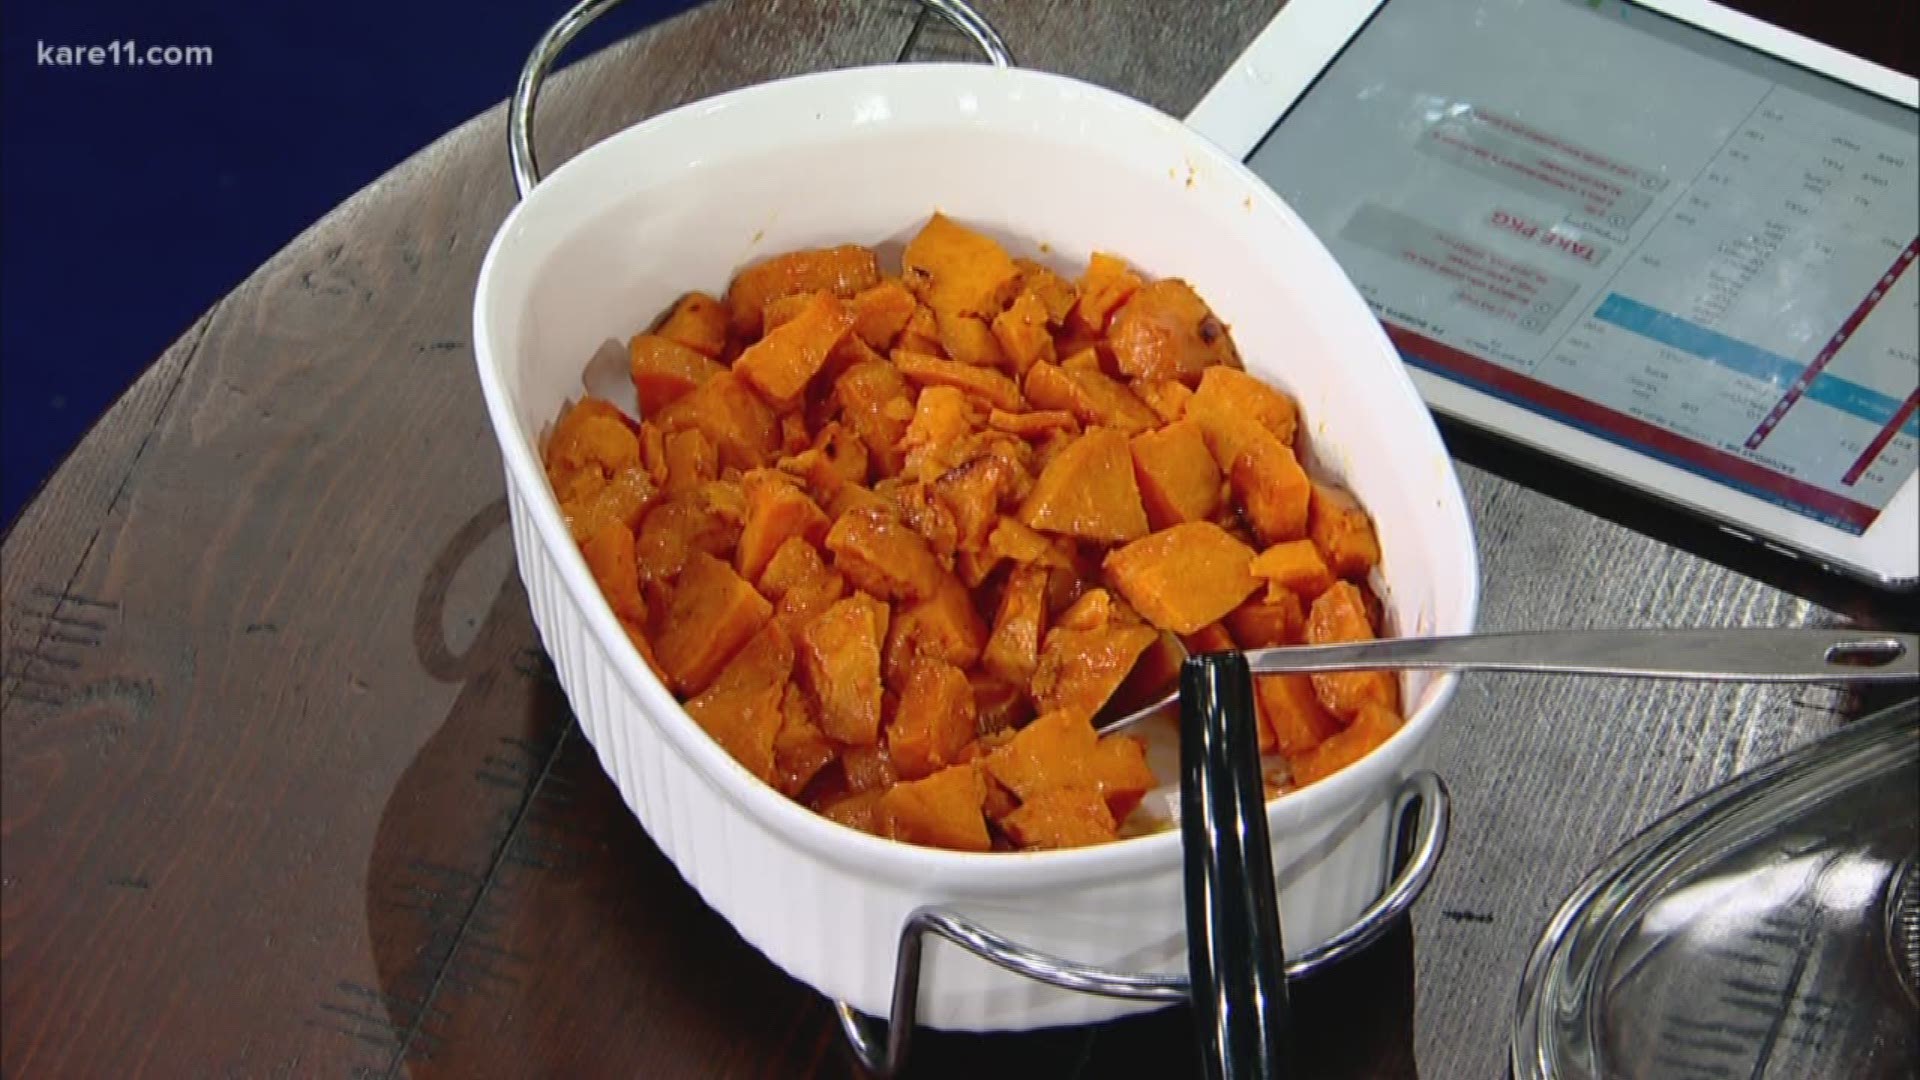 Sports Anchor/Reporter and KARE 11 Saturday Co-Host, Dave Schwartz, shows us how to make one of his favorite family recipes.